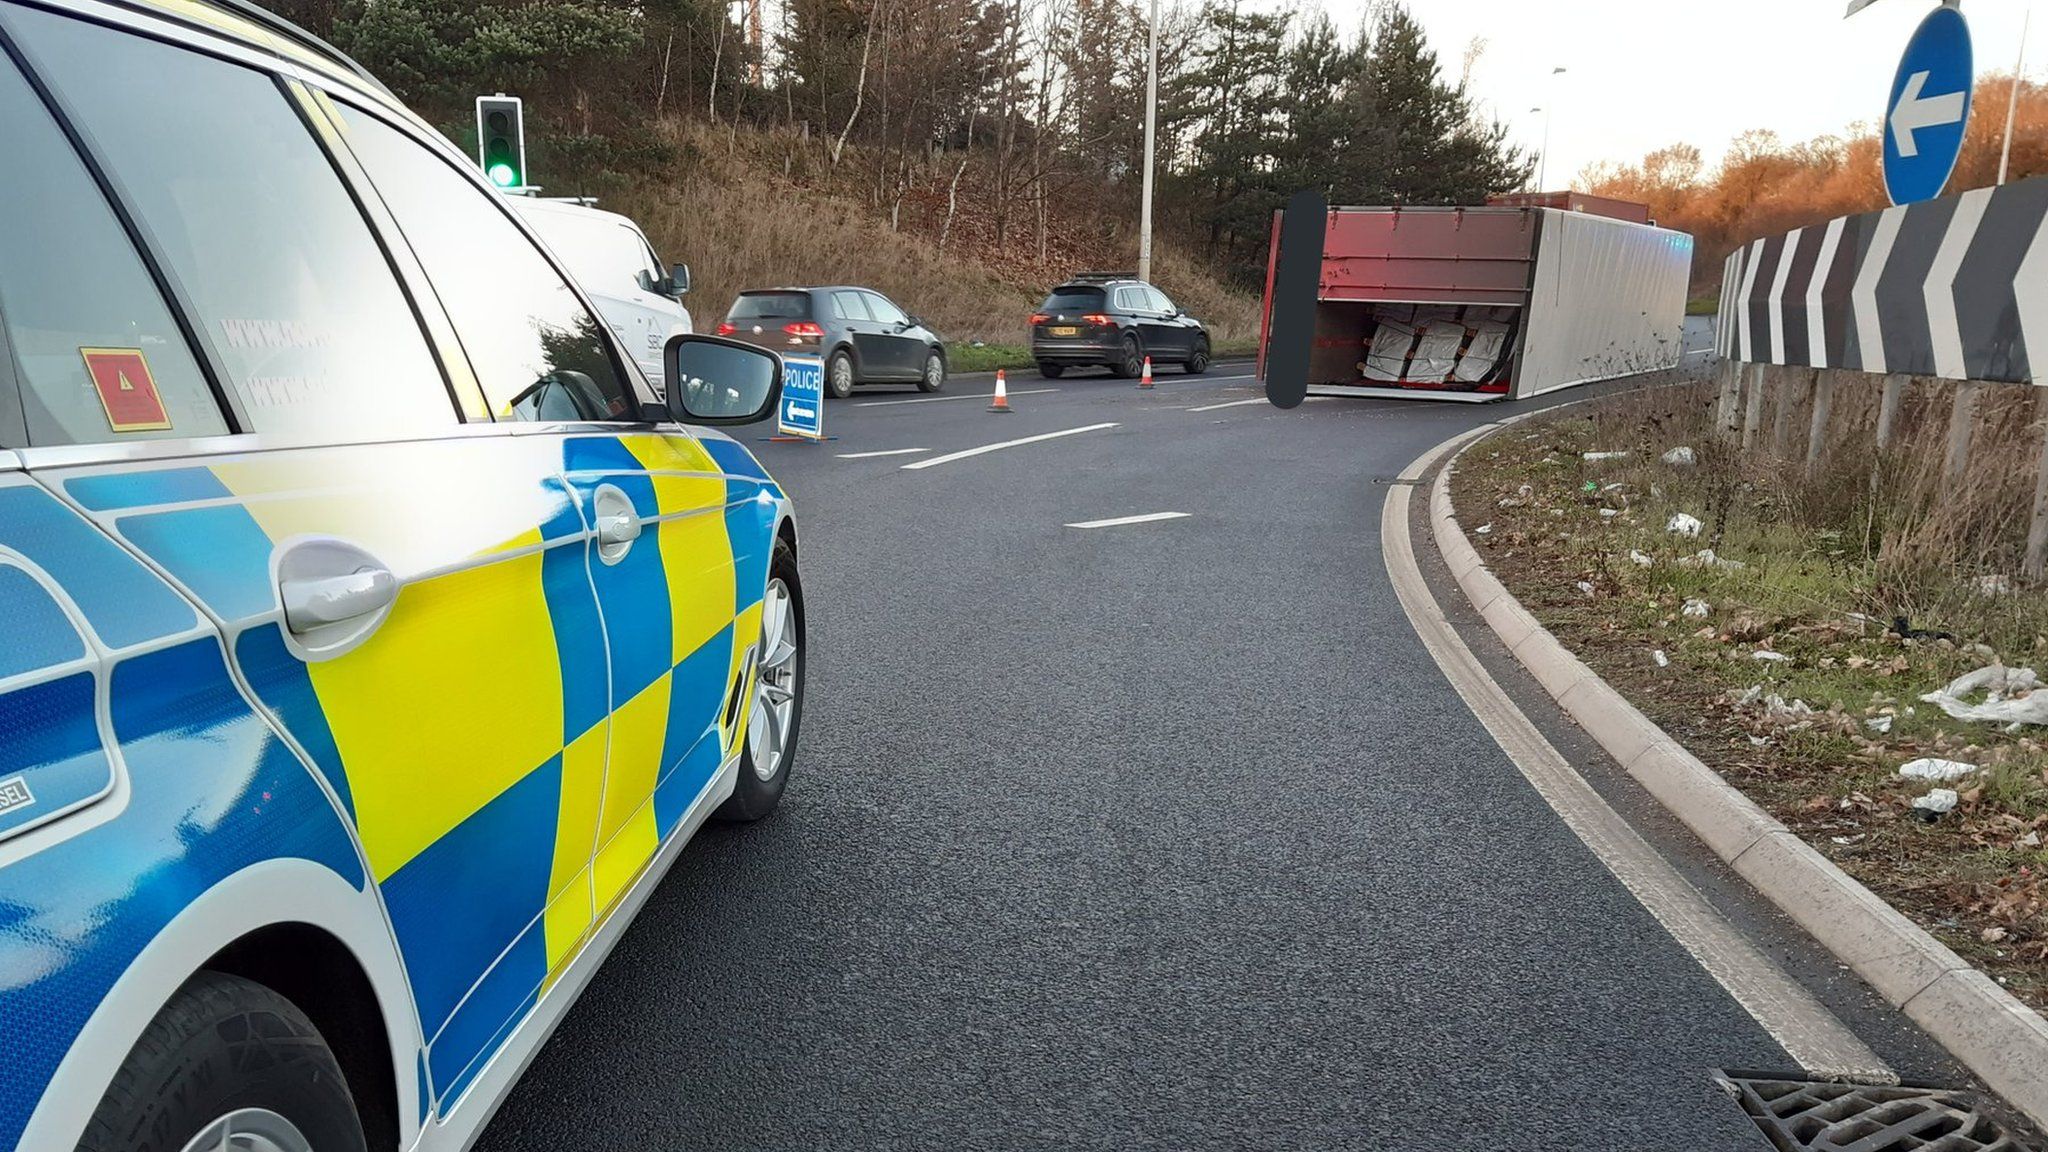 Lorry overturned on a roundabout